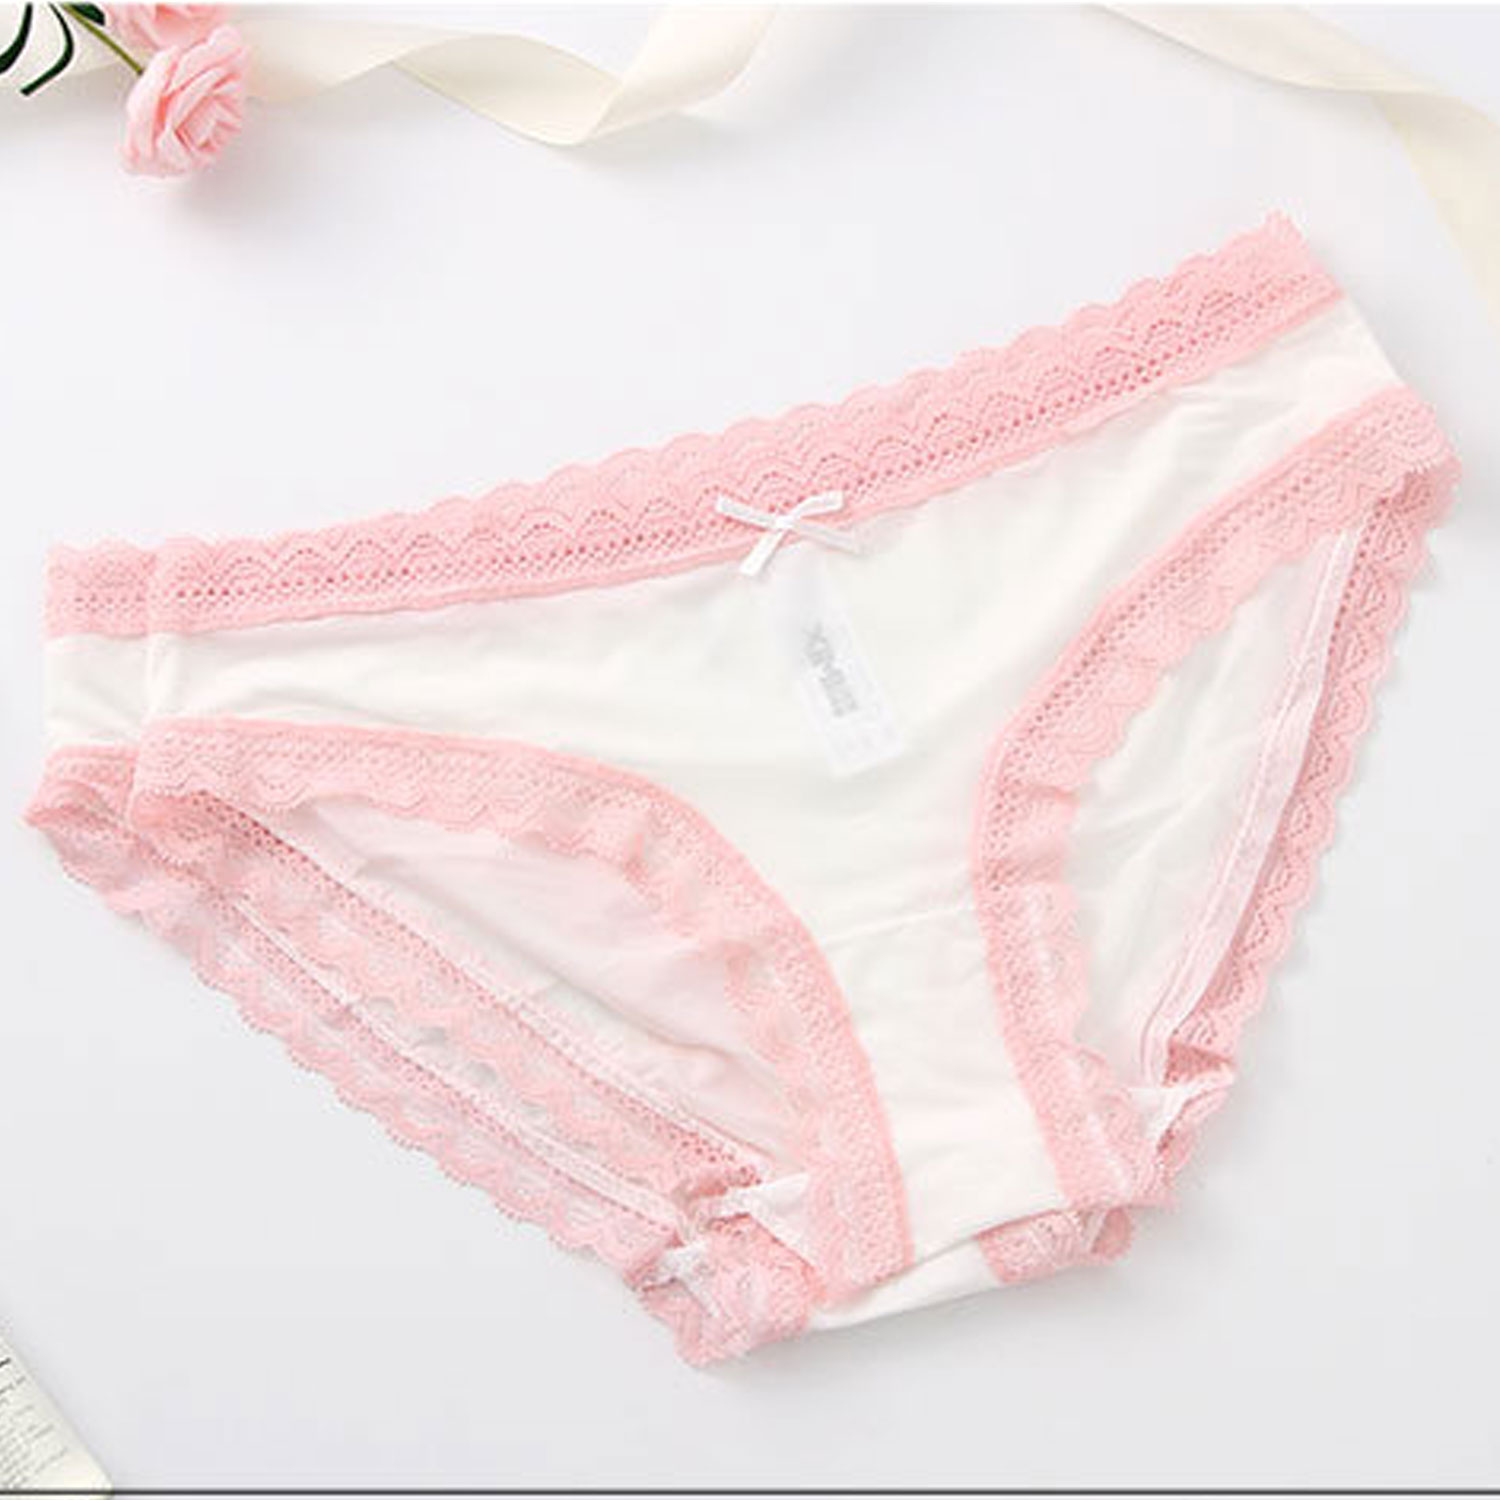 Panties With Lace Trim Images